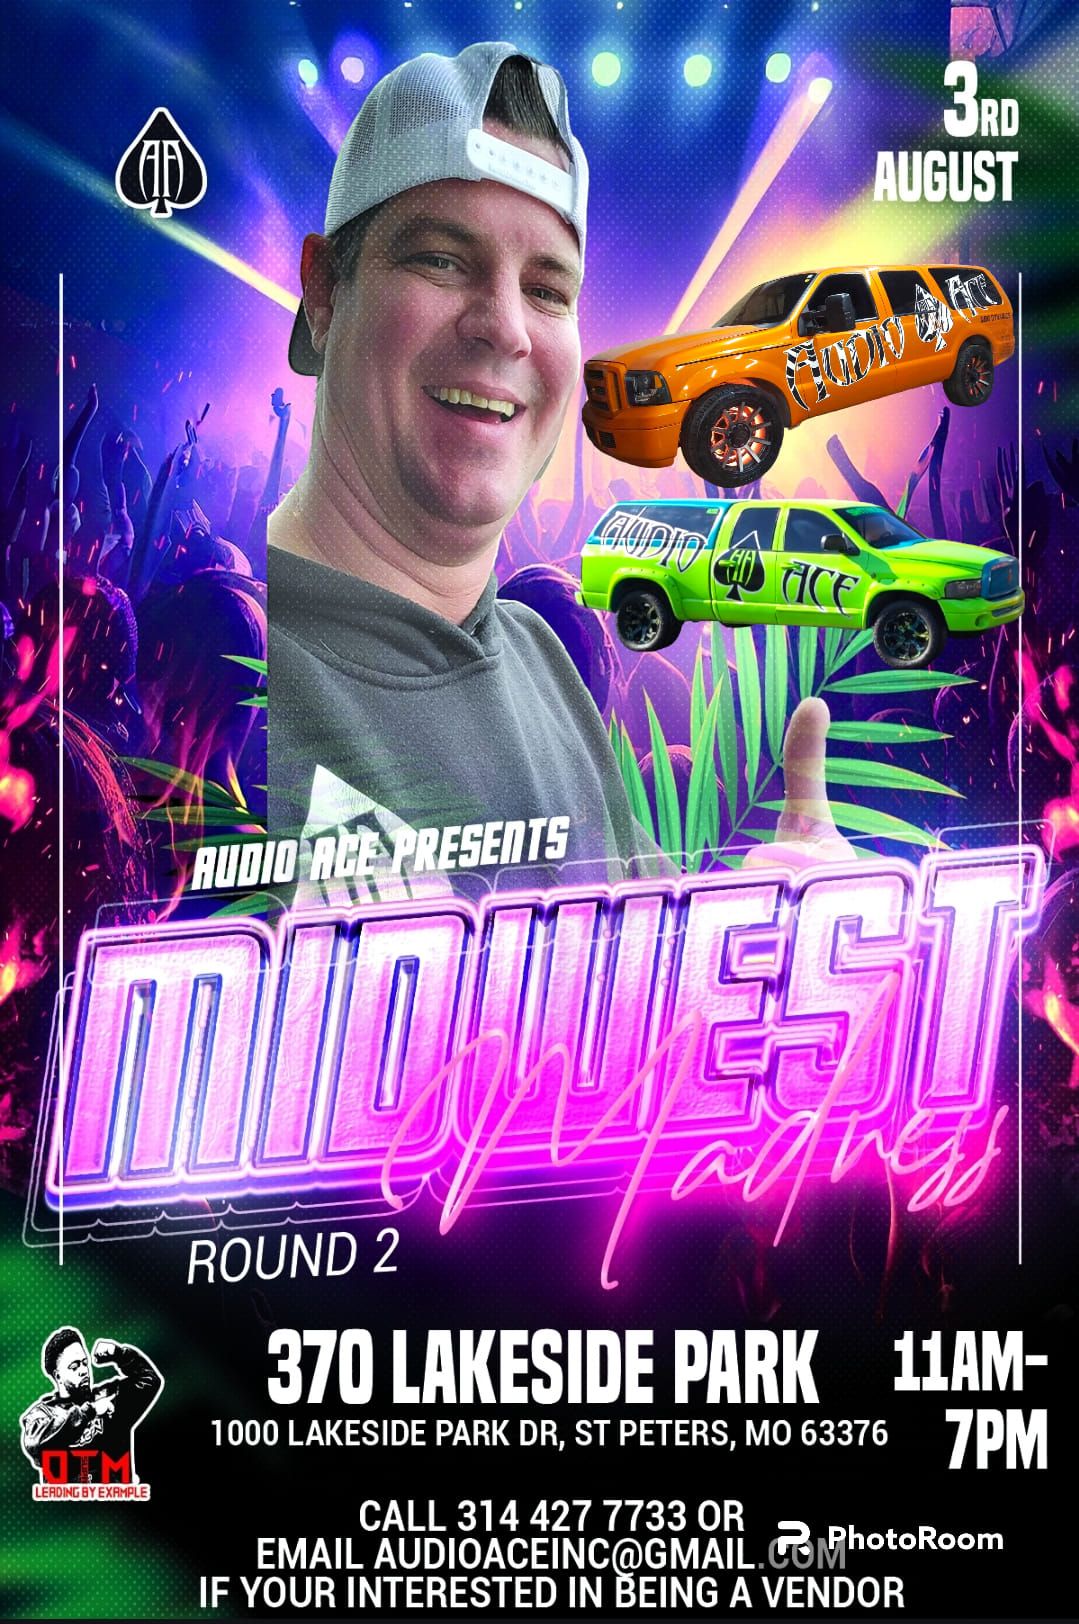 Midwest Madness Round 2